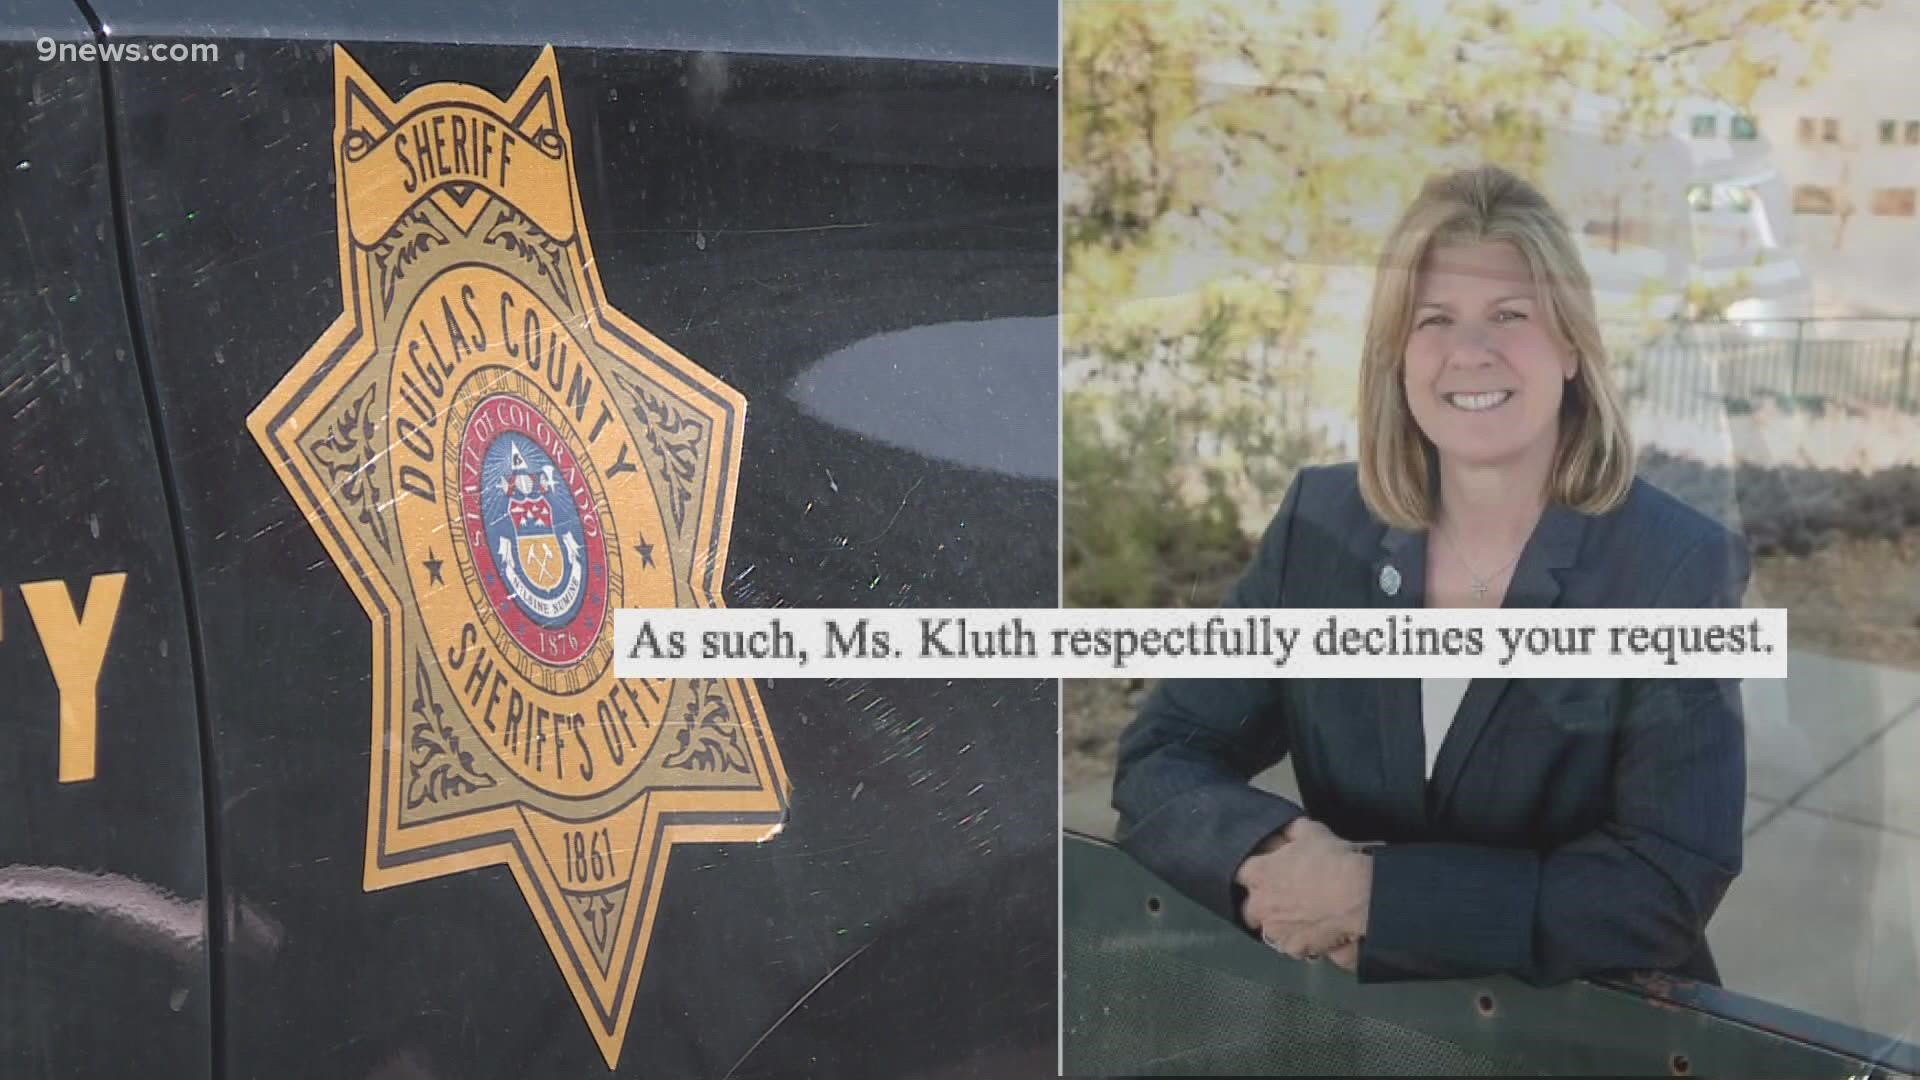 Holly Kluth, candidate for Douglas County sheriff and the former undersheriff, is denying allegations that she ordered another employee to alter her personnel file.